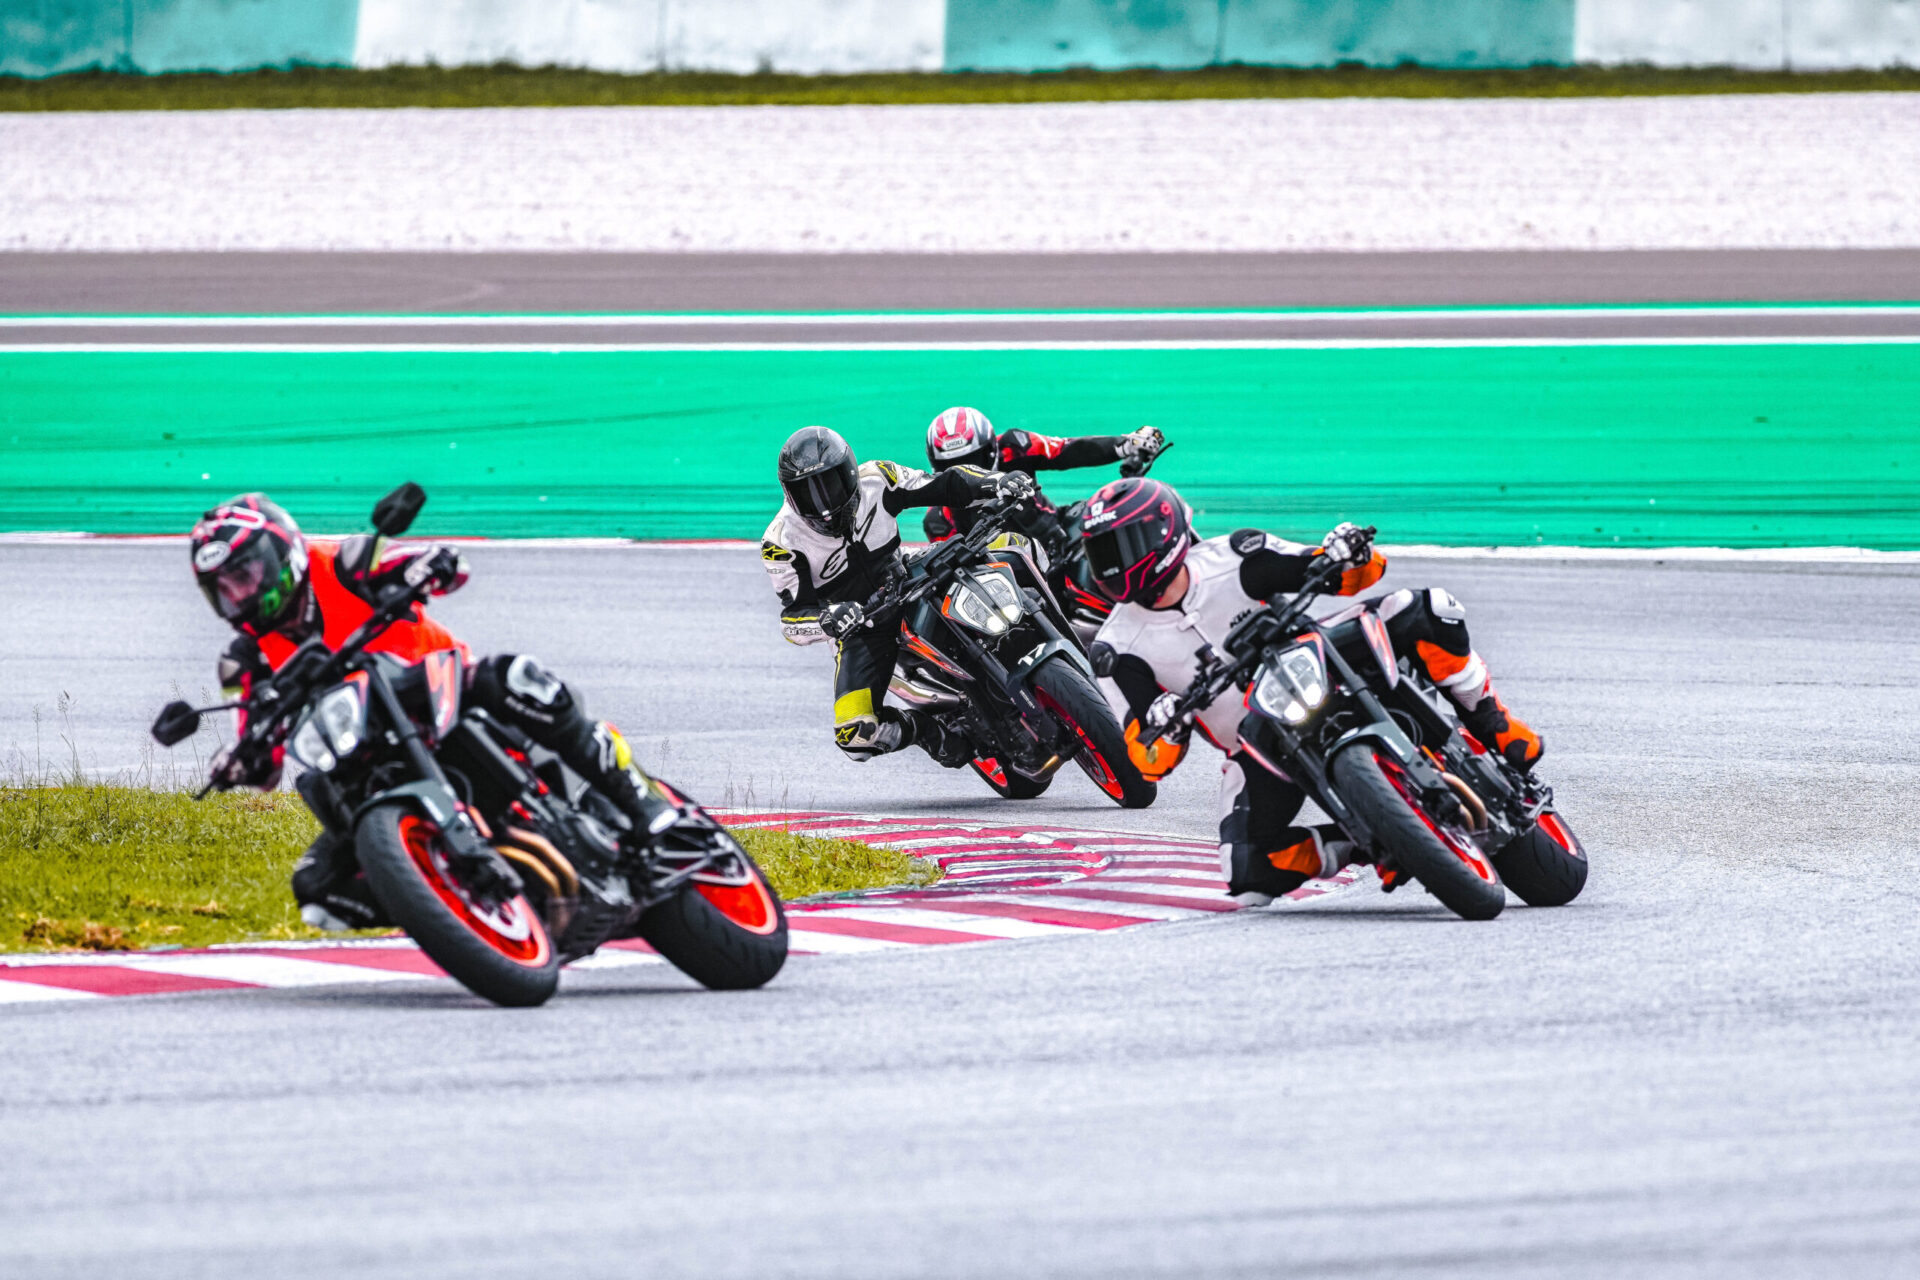 Feel The Thrill at Sepang Intl Circuit KTM 890 DUKE R and RC390 launch